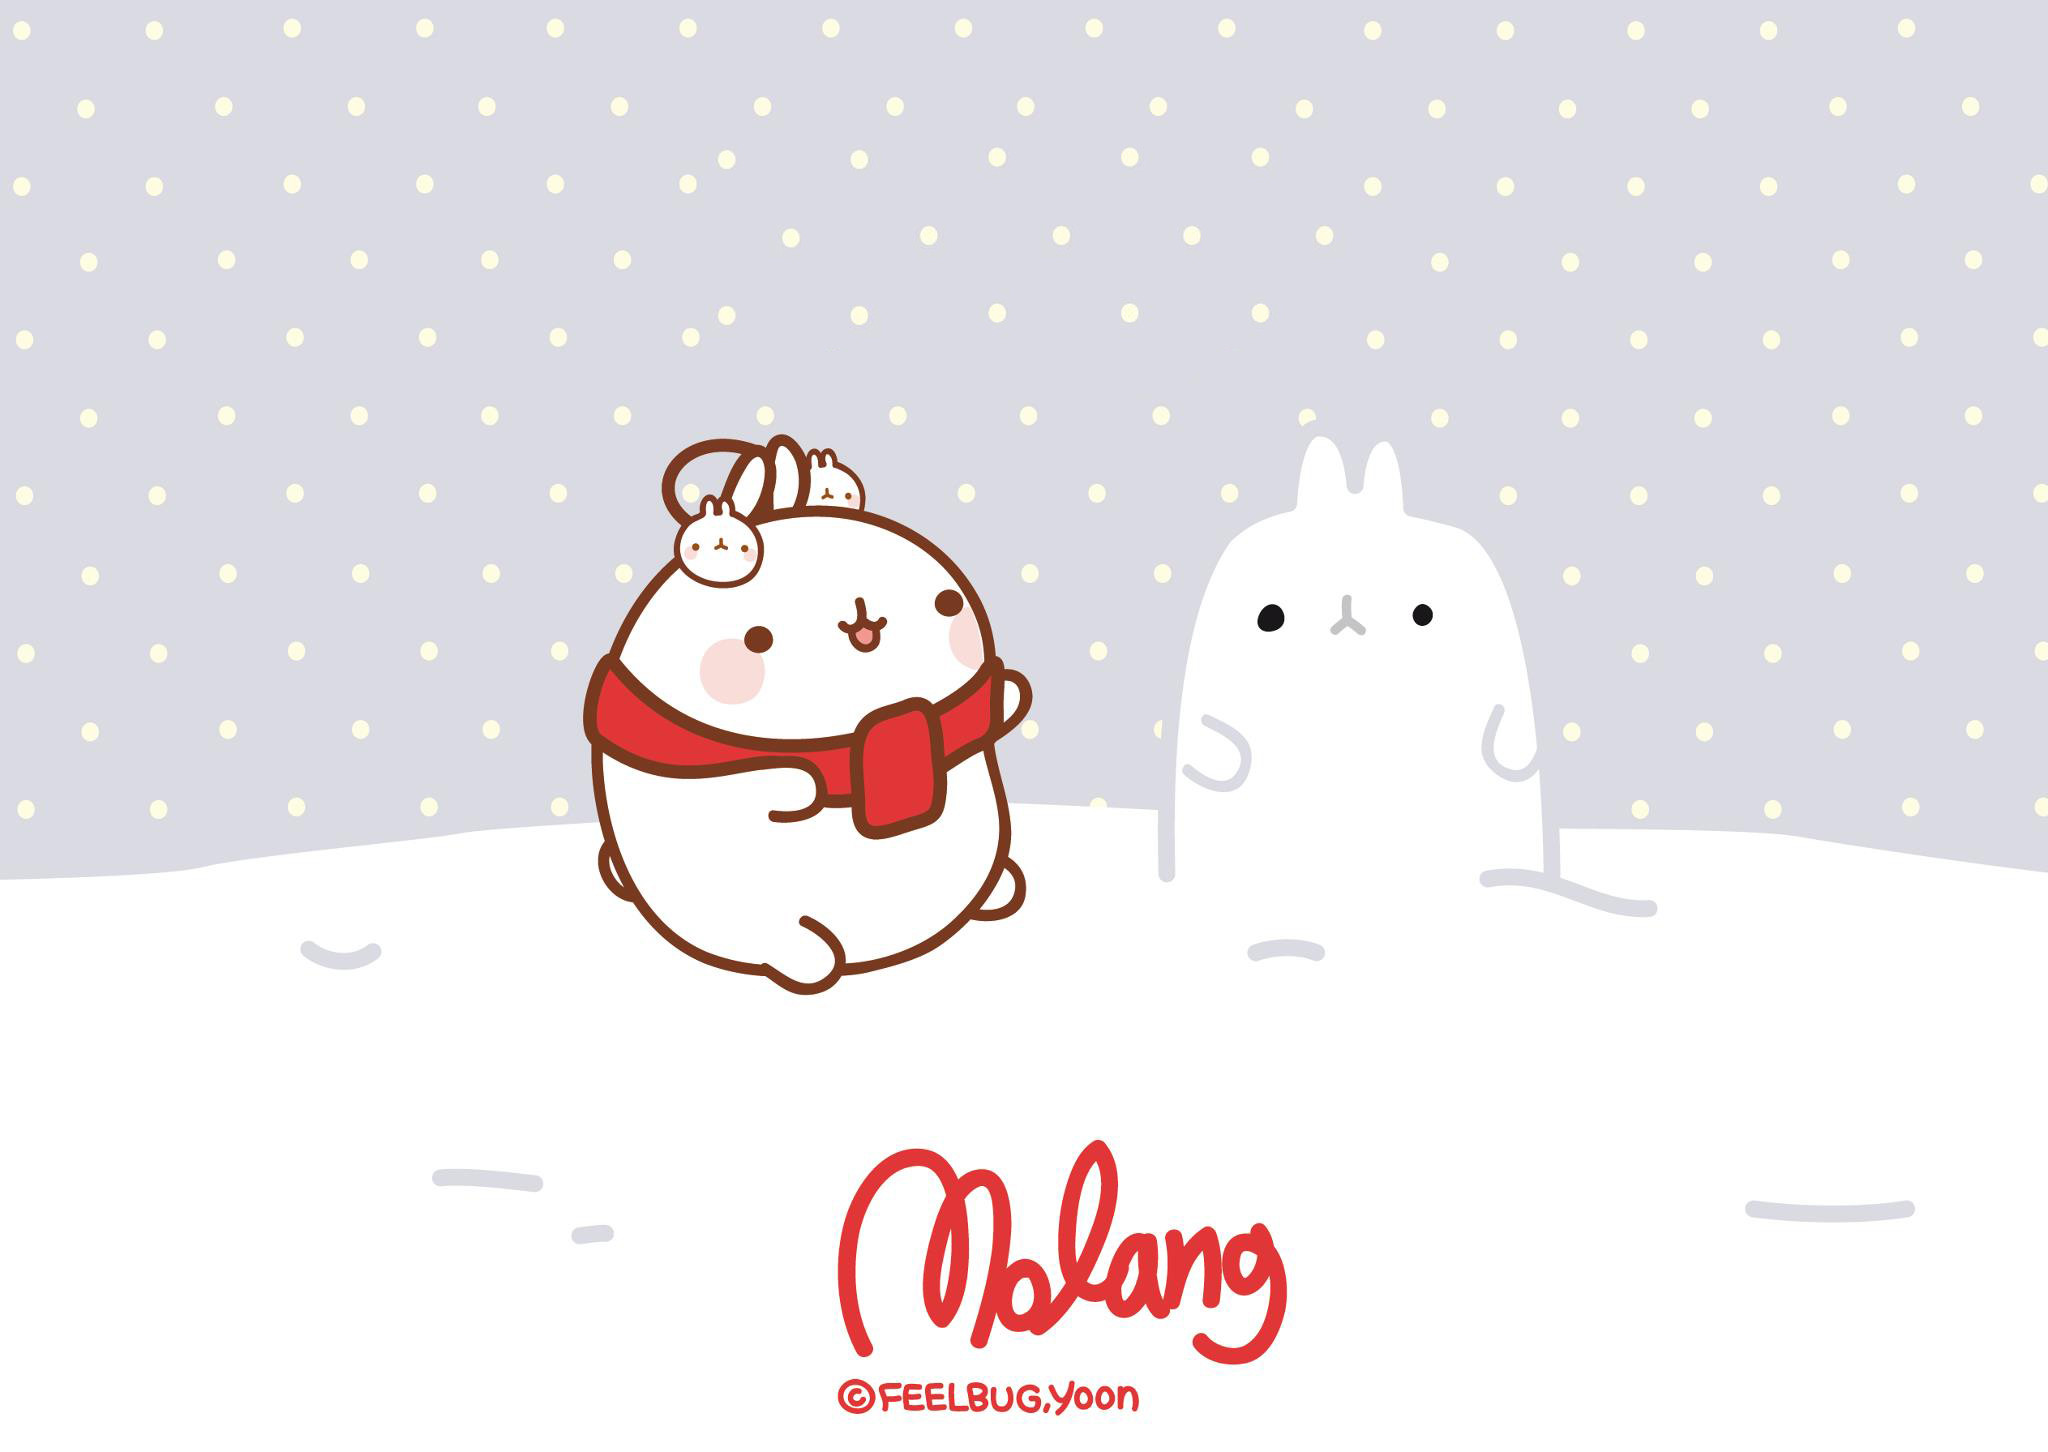 San-X Molang Christmas Desktop Wallpapers – Here are 3 super cute Molang Desktop  Backgrounds for Christmas! Click each image to be taken to the full size …